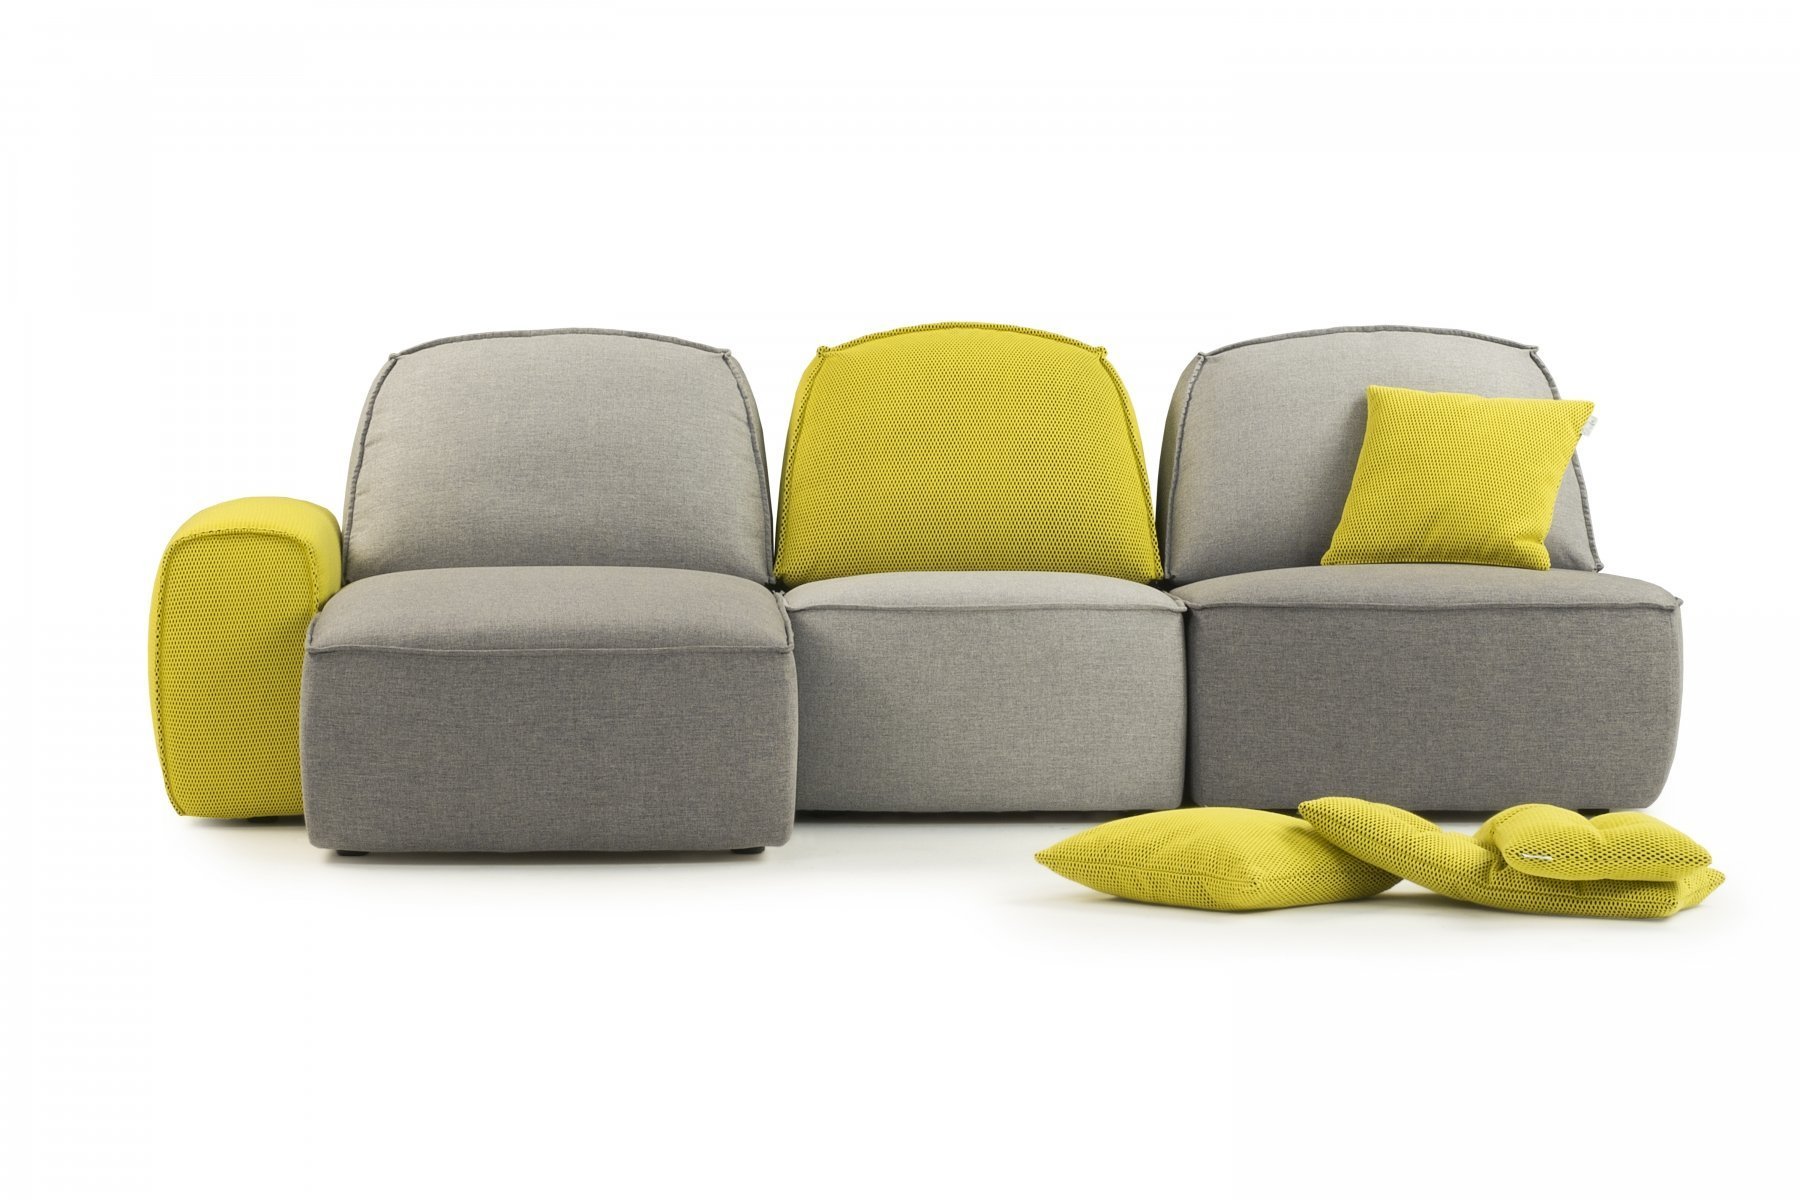 Lazy is a soft-shaped, cozy sofa which can create multiple combinations